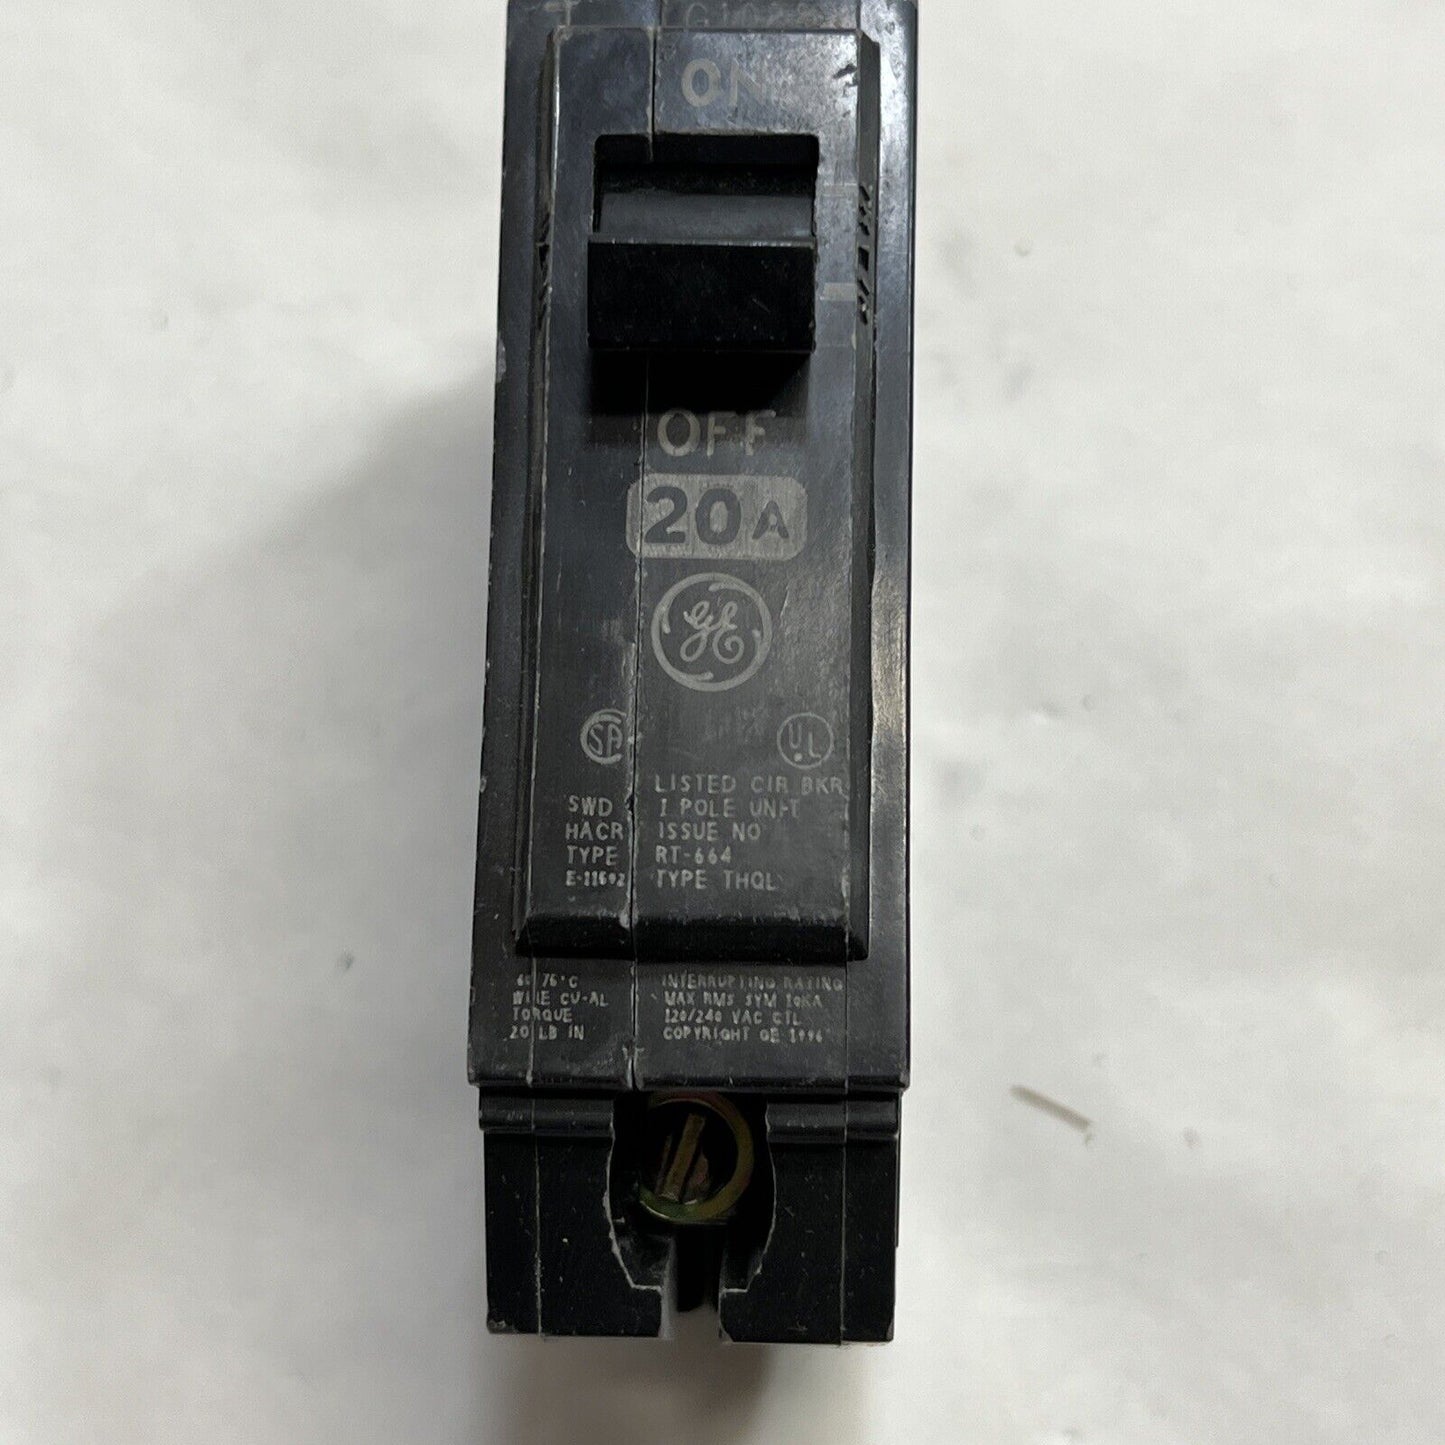 GENERAL ELECTRIC 1 POLE 30 AMP BOLT-IN TYPE THQB RT 664 CIRCUIT BREAKER